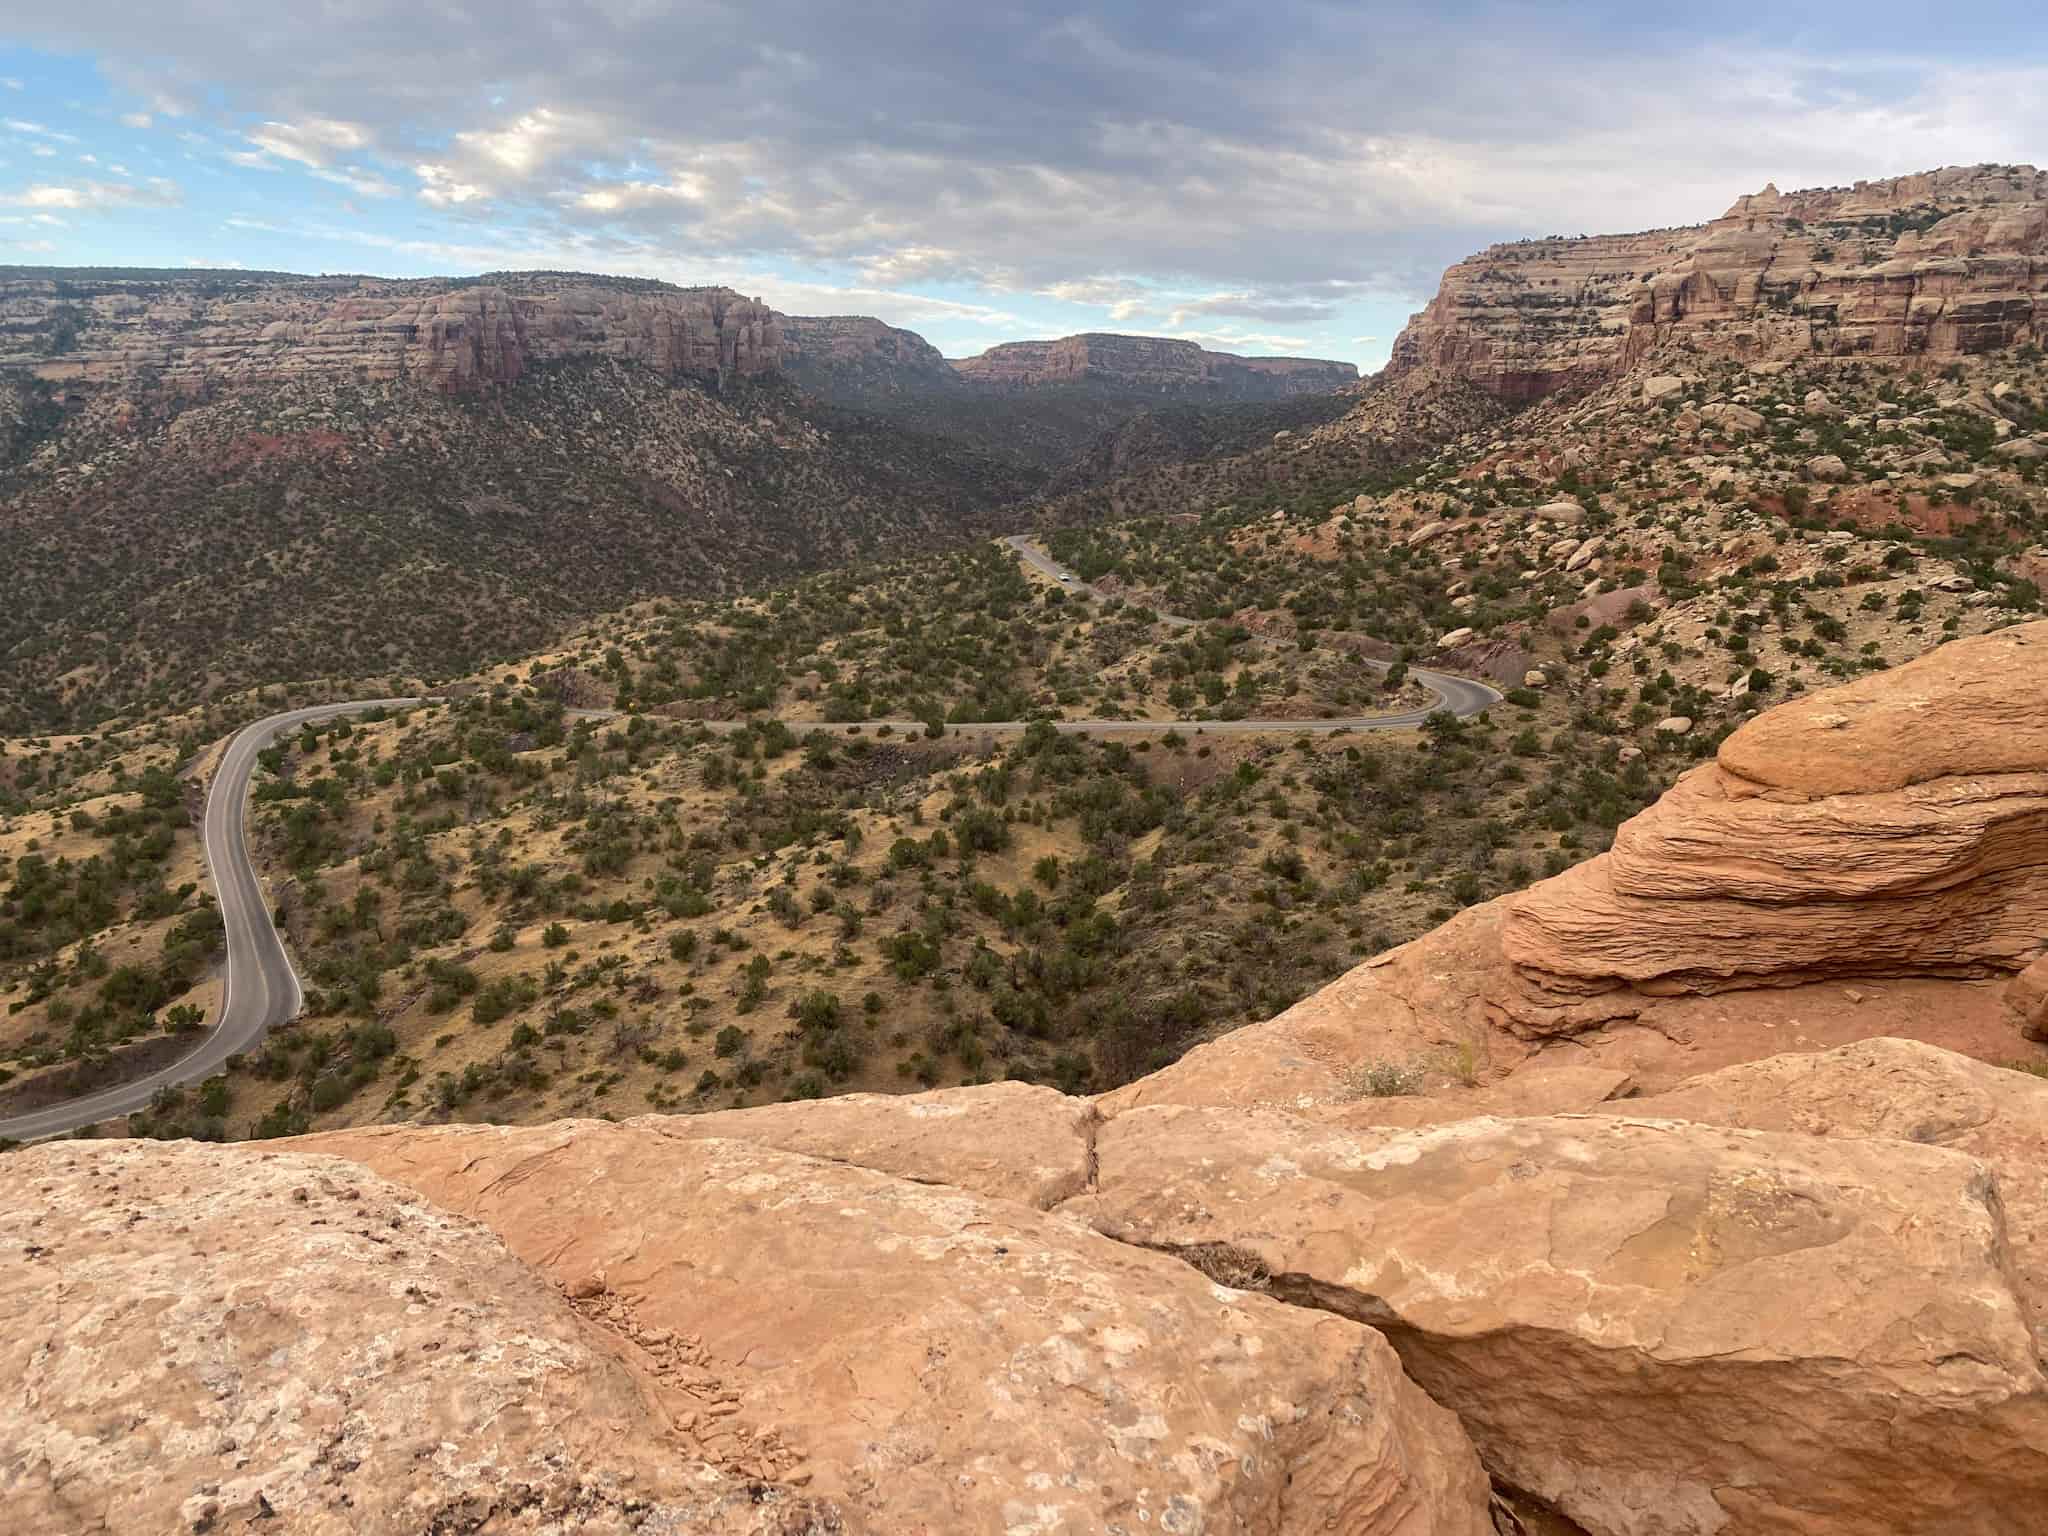 A winding road through juniper trees in a red rock canyon with sandstone rocks in the foreground in Colorado National Monument.